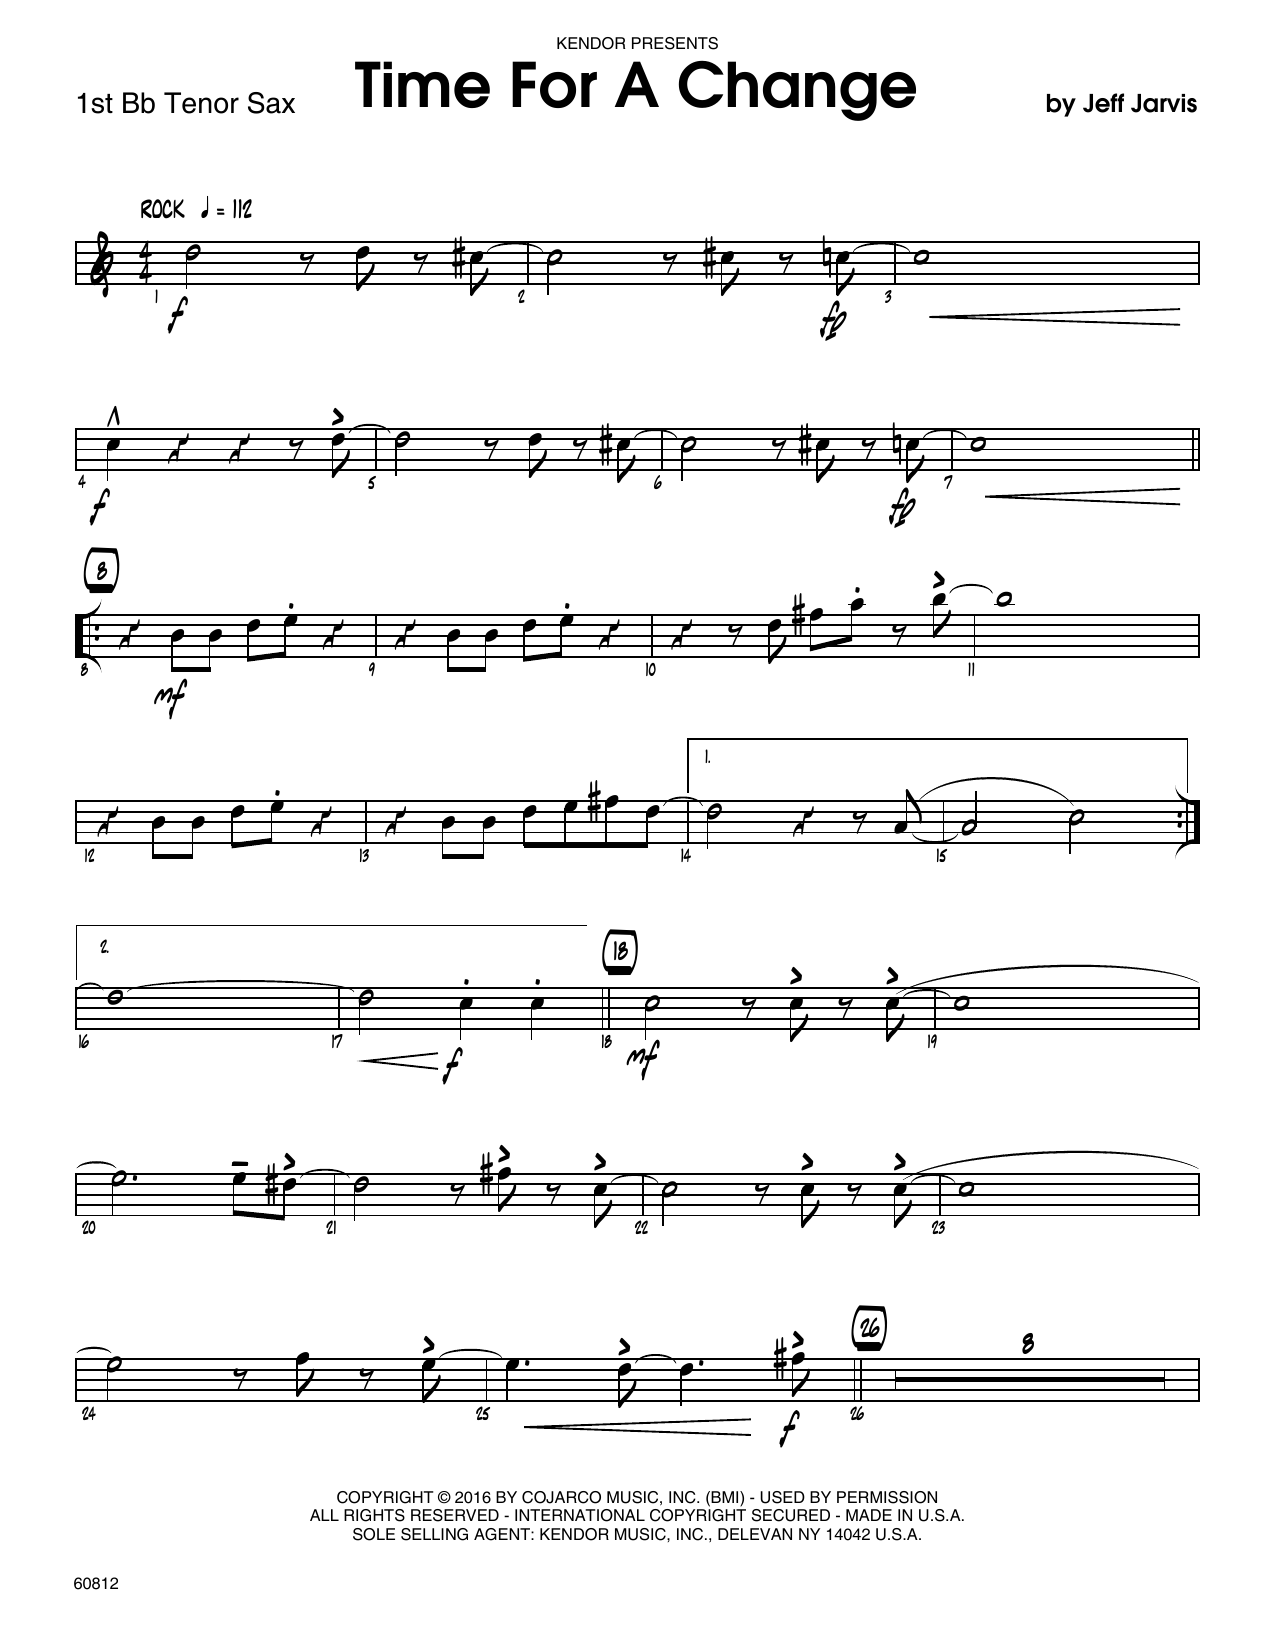 Download Jeff Jarvis Time For A Change - 1st Tenor Saxophone Sheet Music